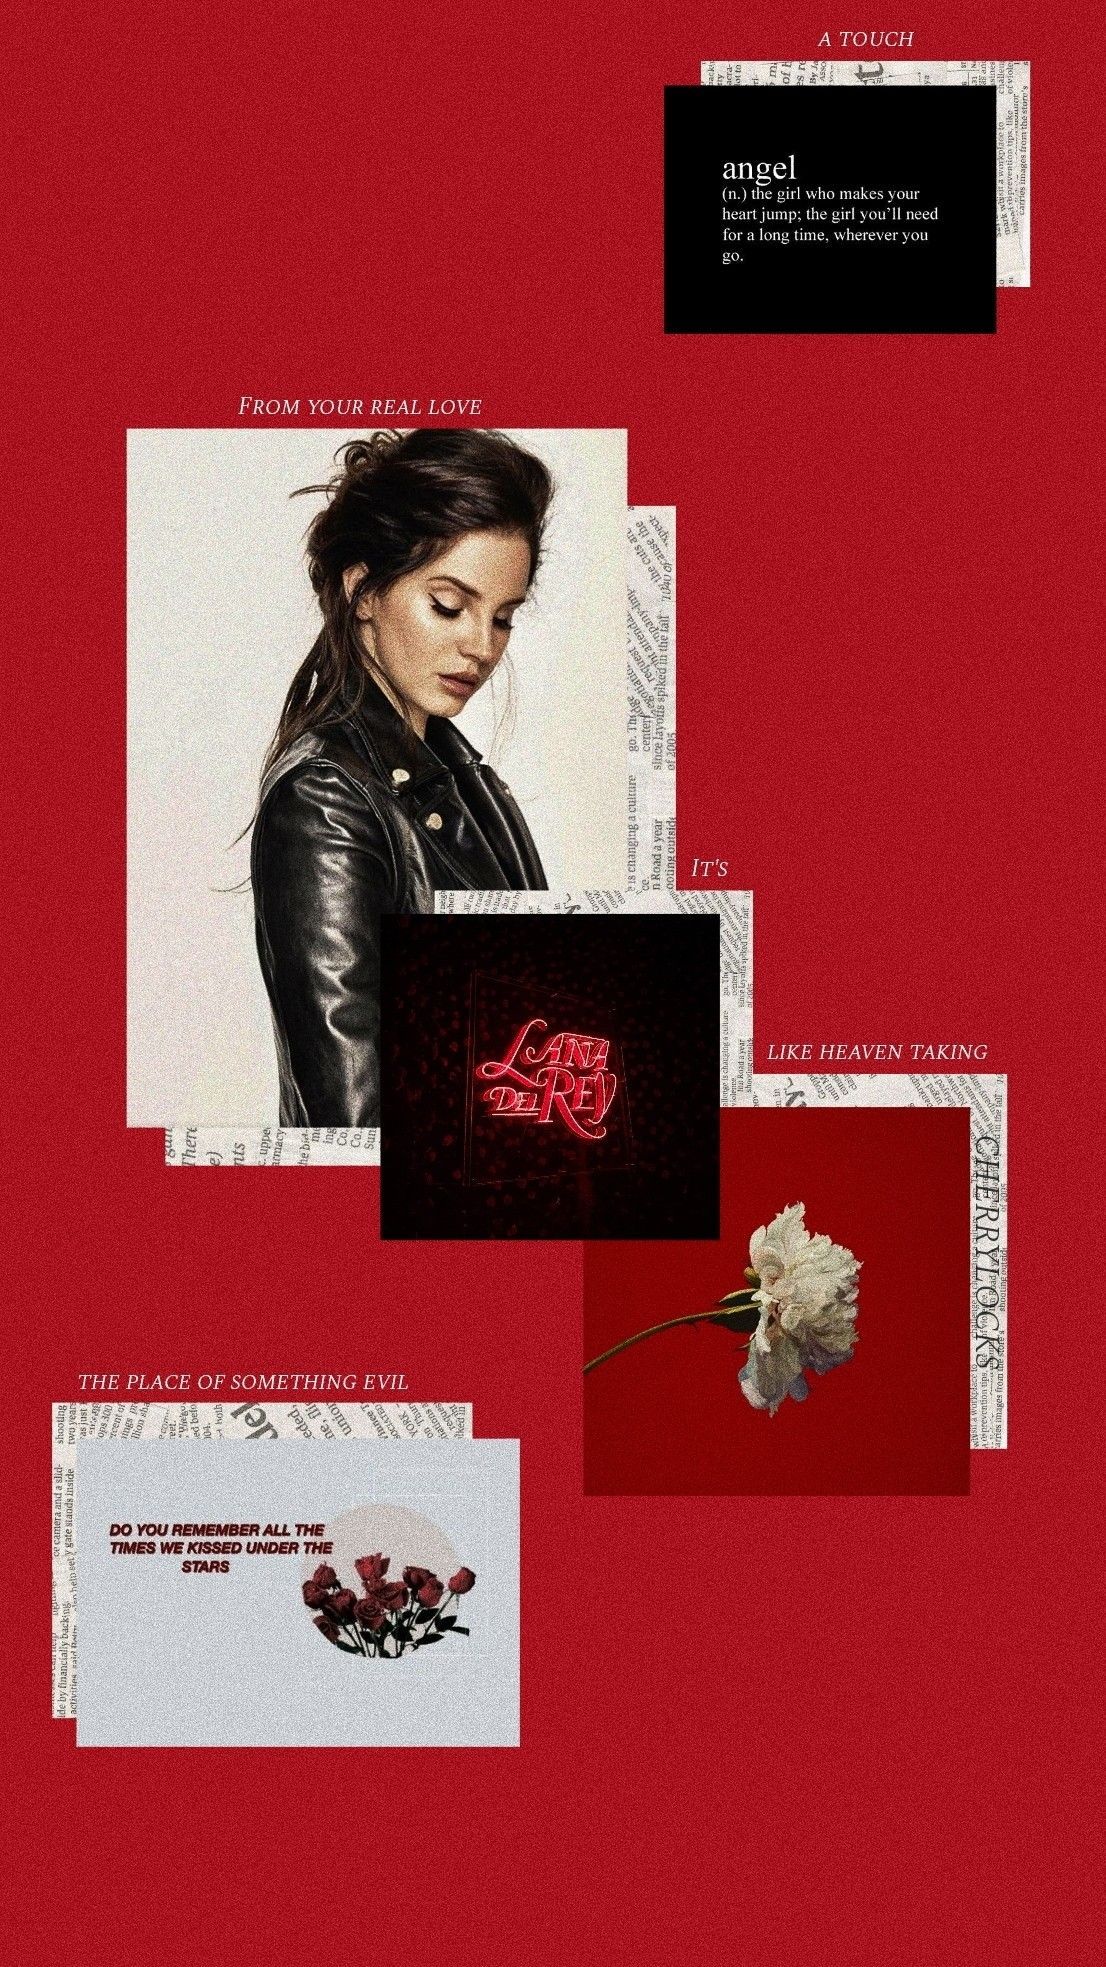 A collage of the red album cover, the lyrics, and some of the singles from the album - Lana Del Rey